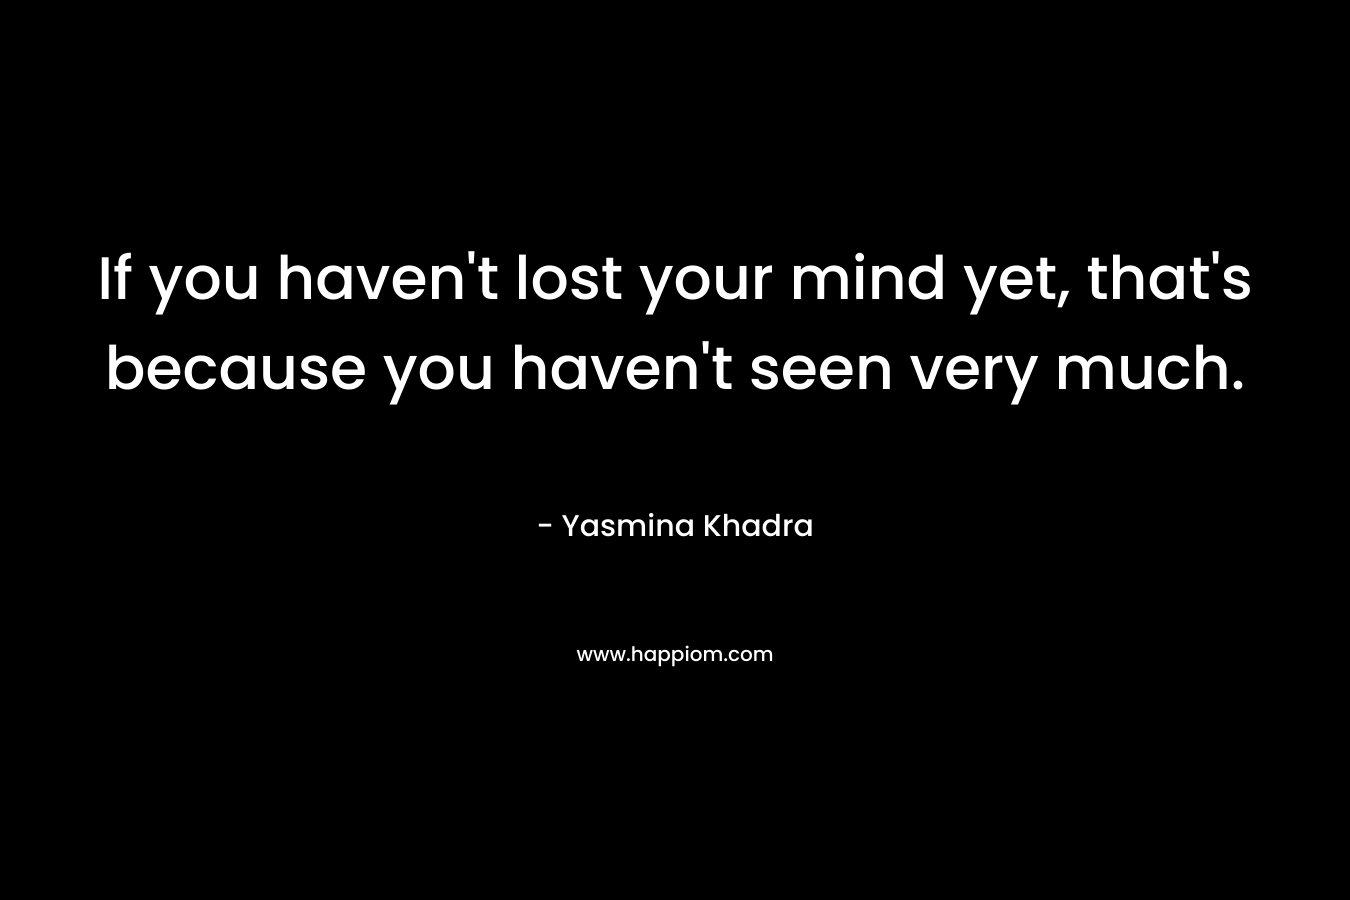 If you haven’t lost your mind yet, that’s because you haven’t seen very much. – Yasmina Khadra